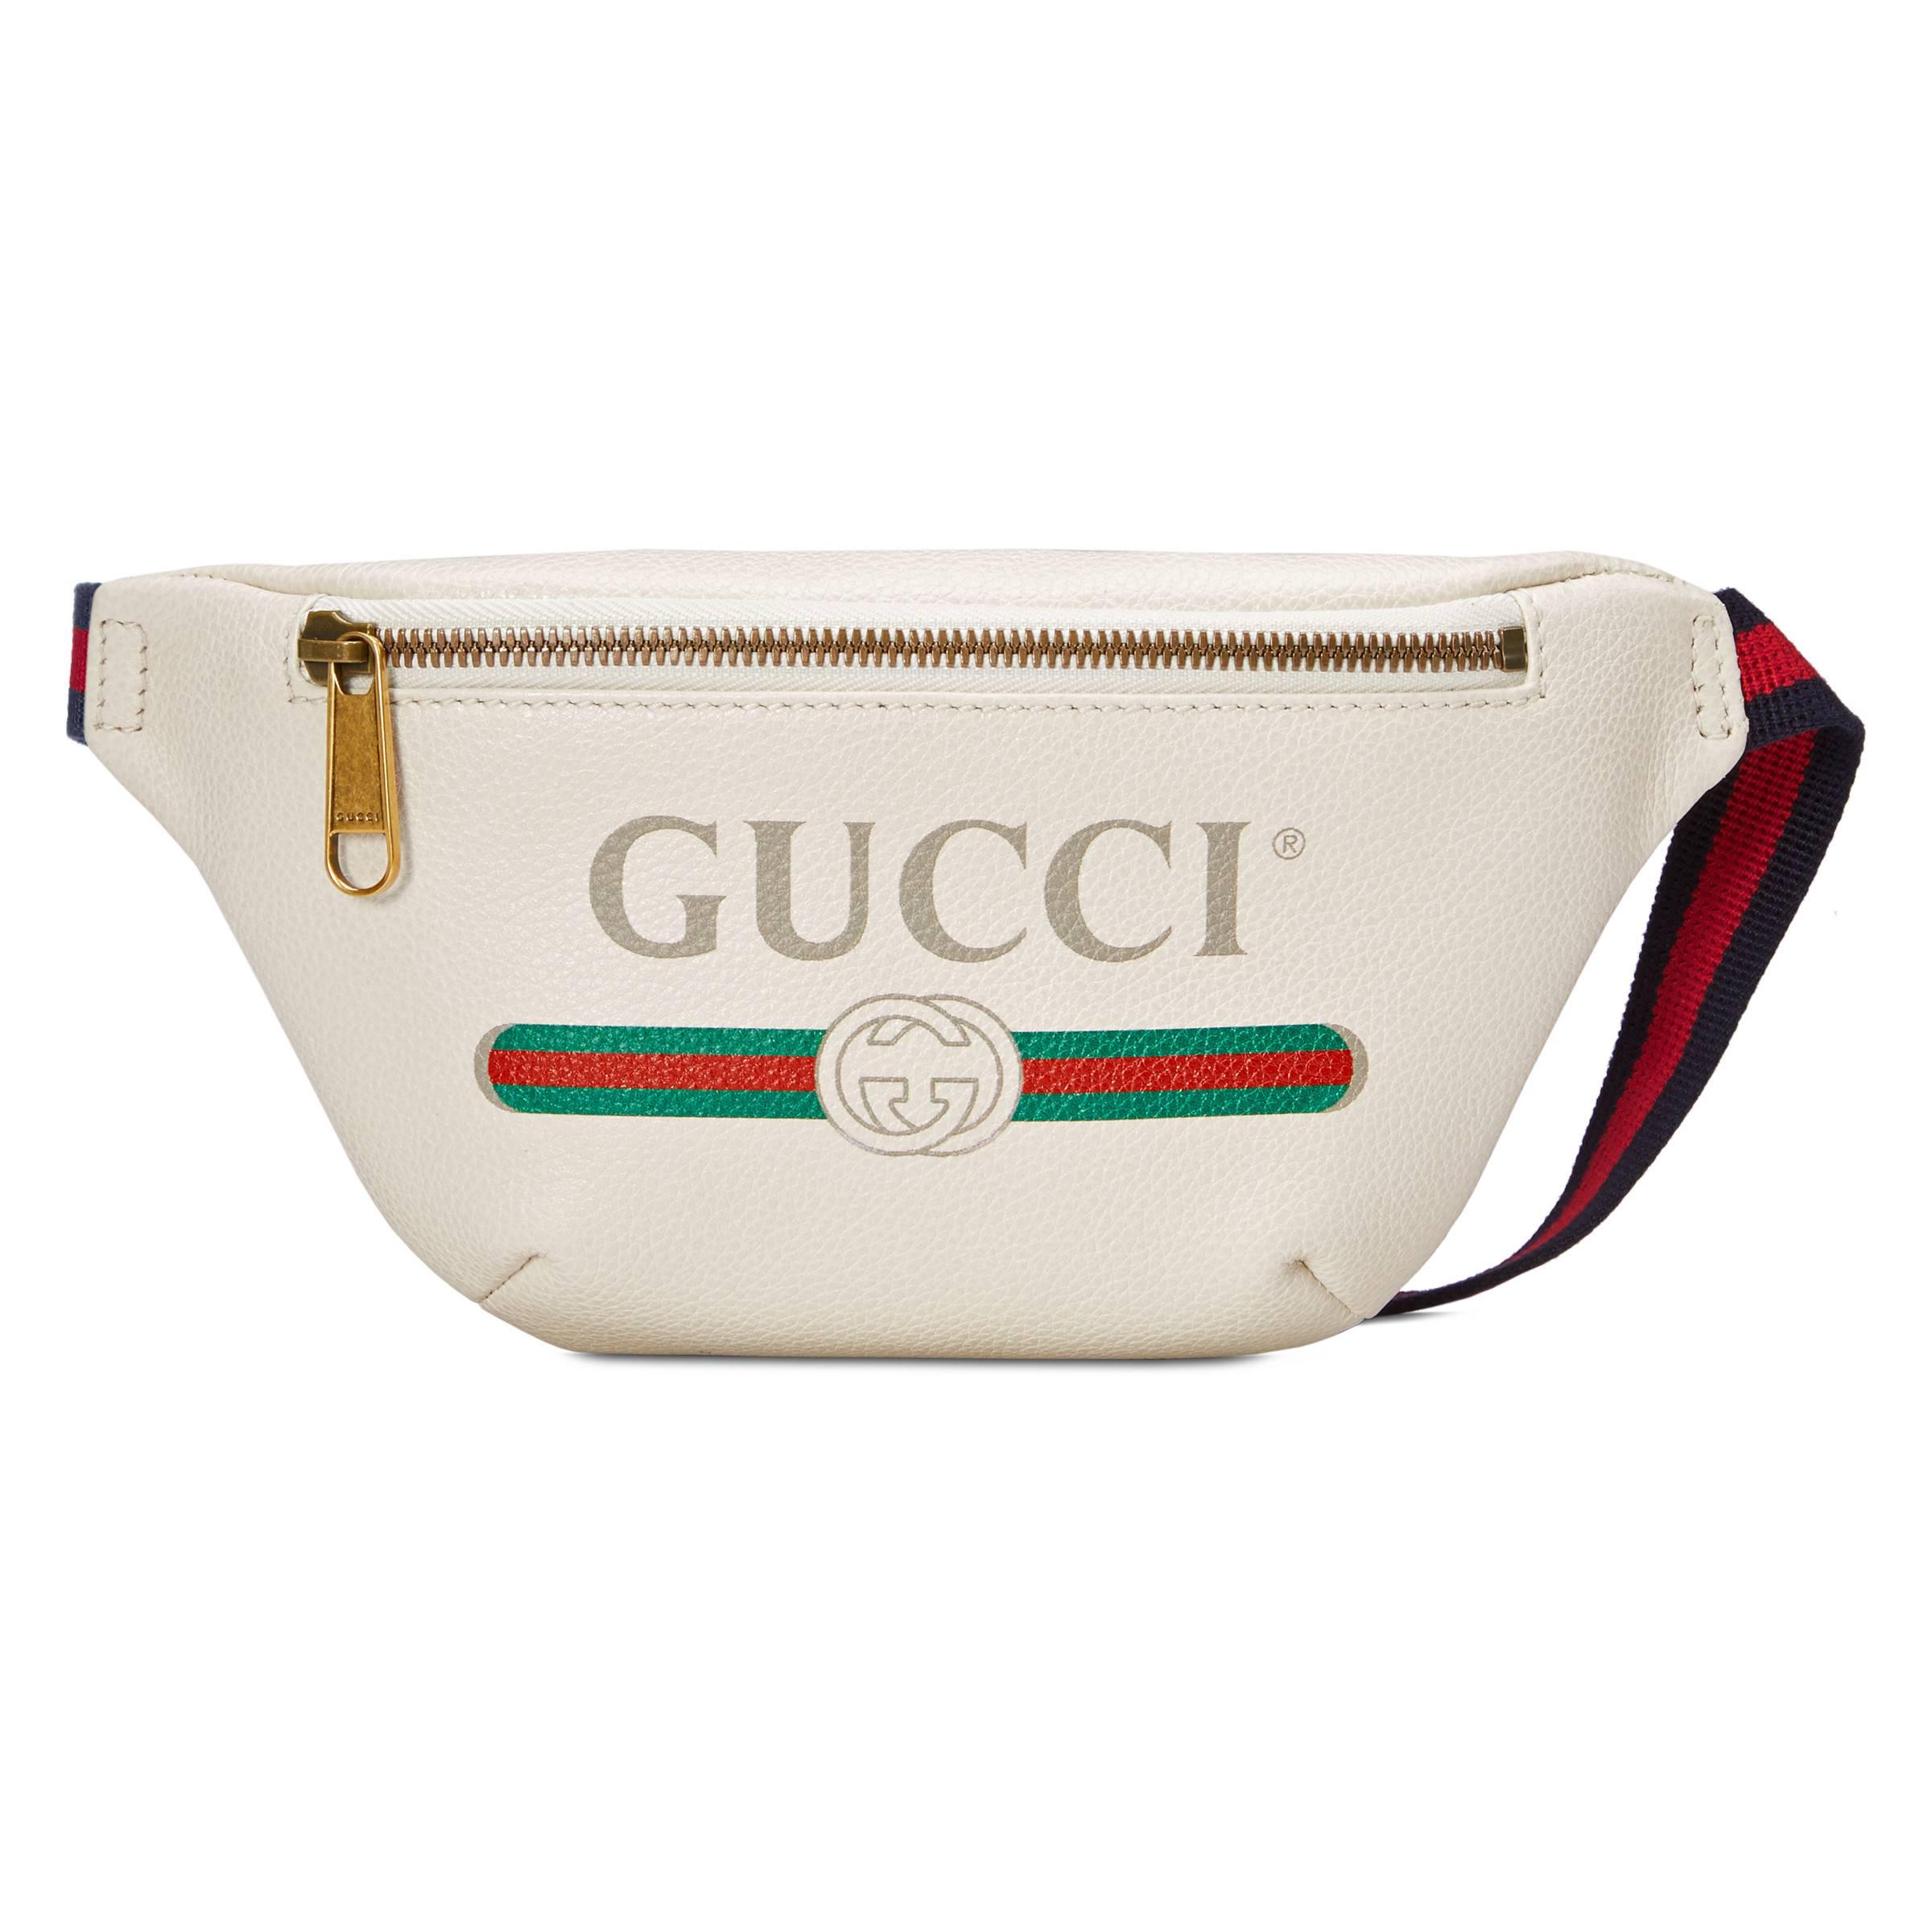 Gucci Print Small Belt Bag in White | Lyst